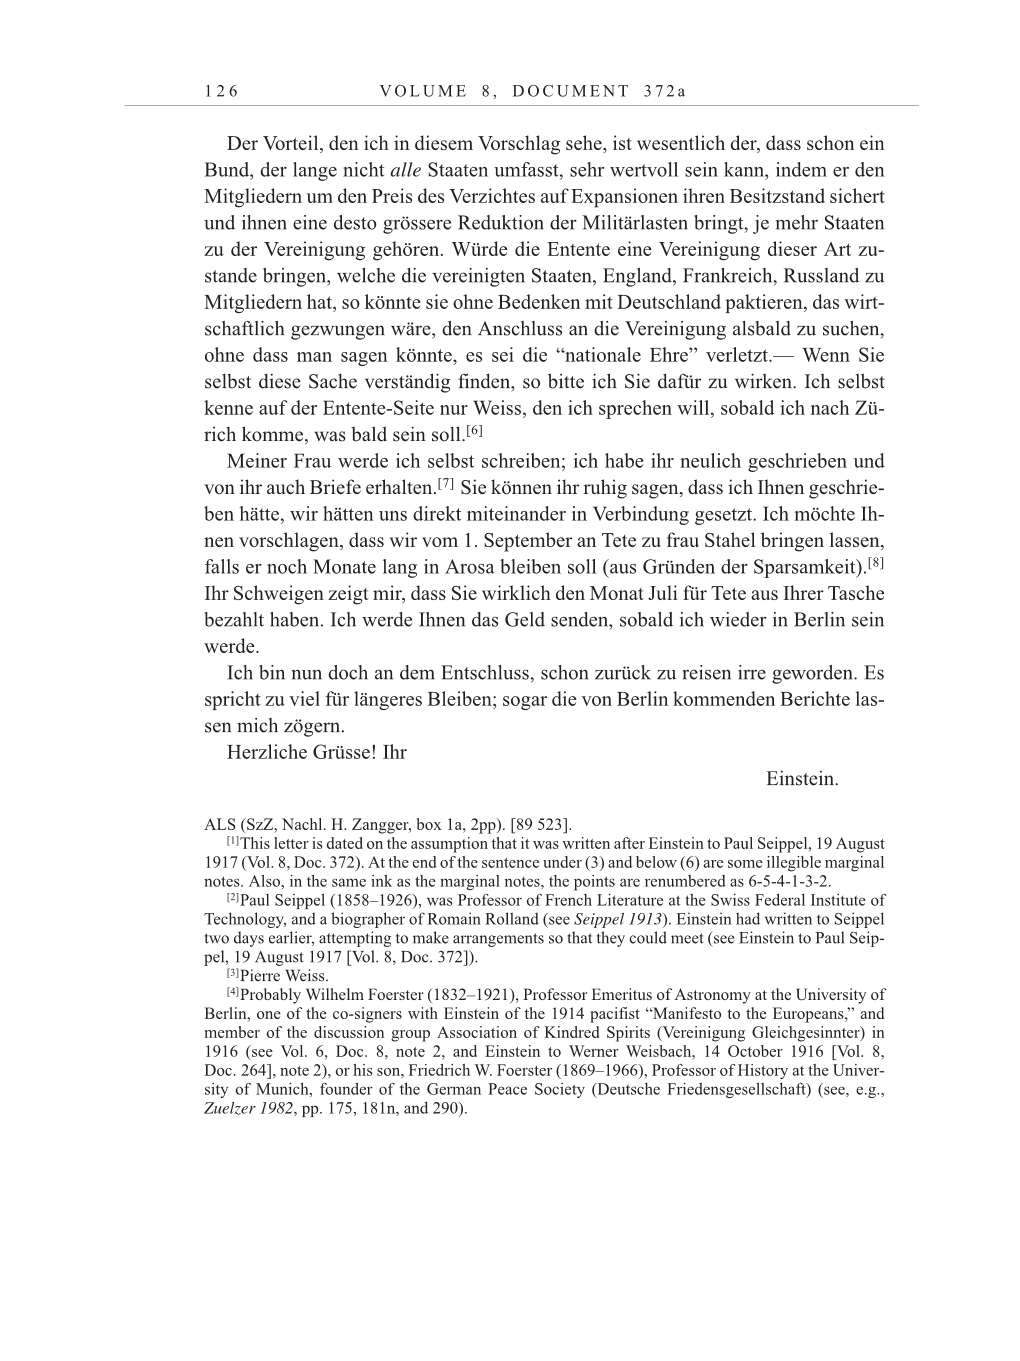 Volume 10: The Berlin Years: Correspondence May-December 1920 / Supplementary Correspondence 1909-1920 page 126